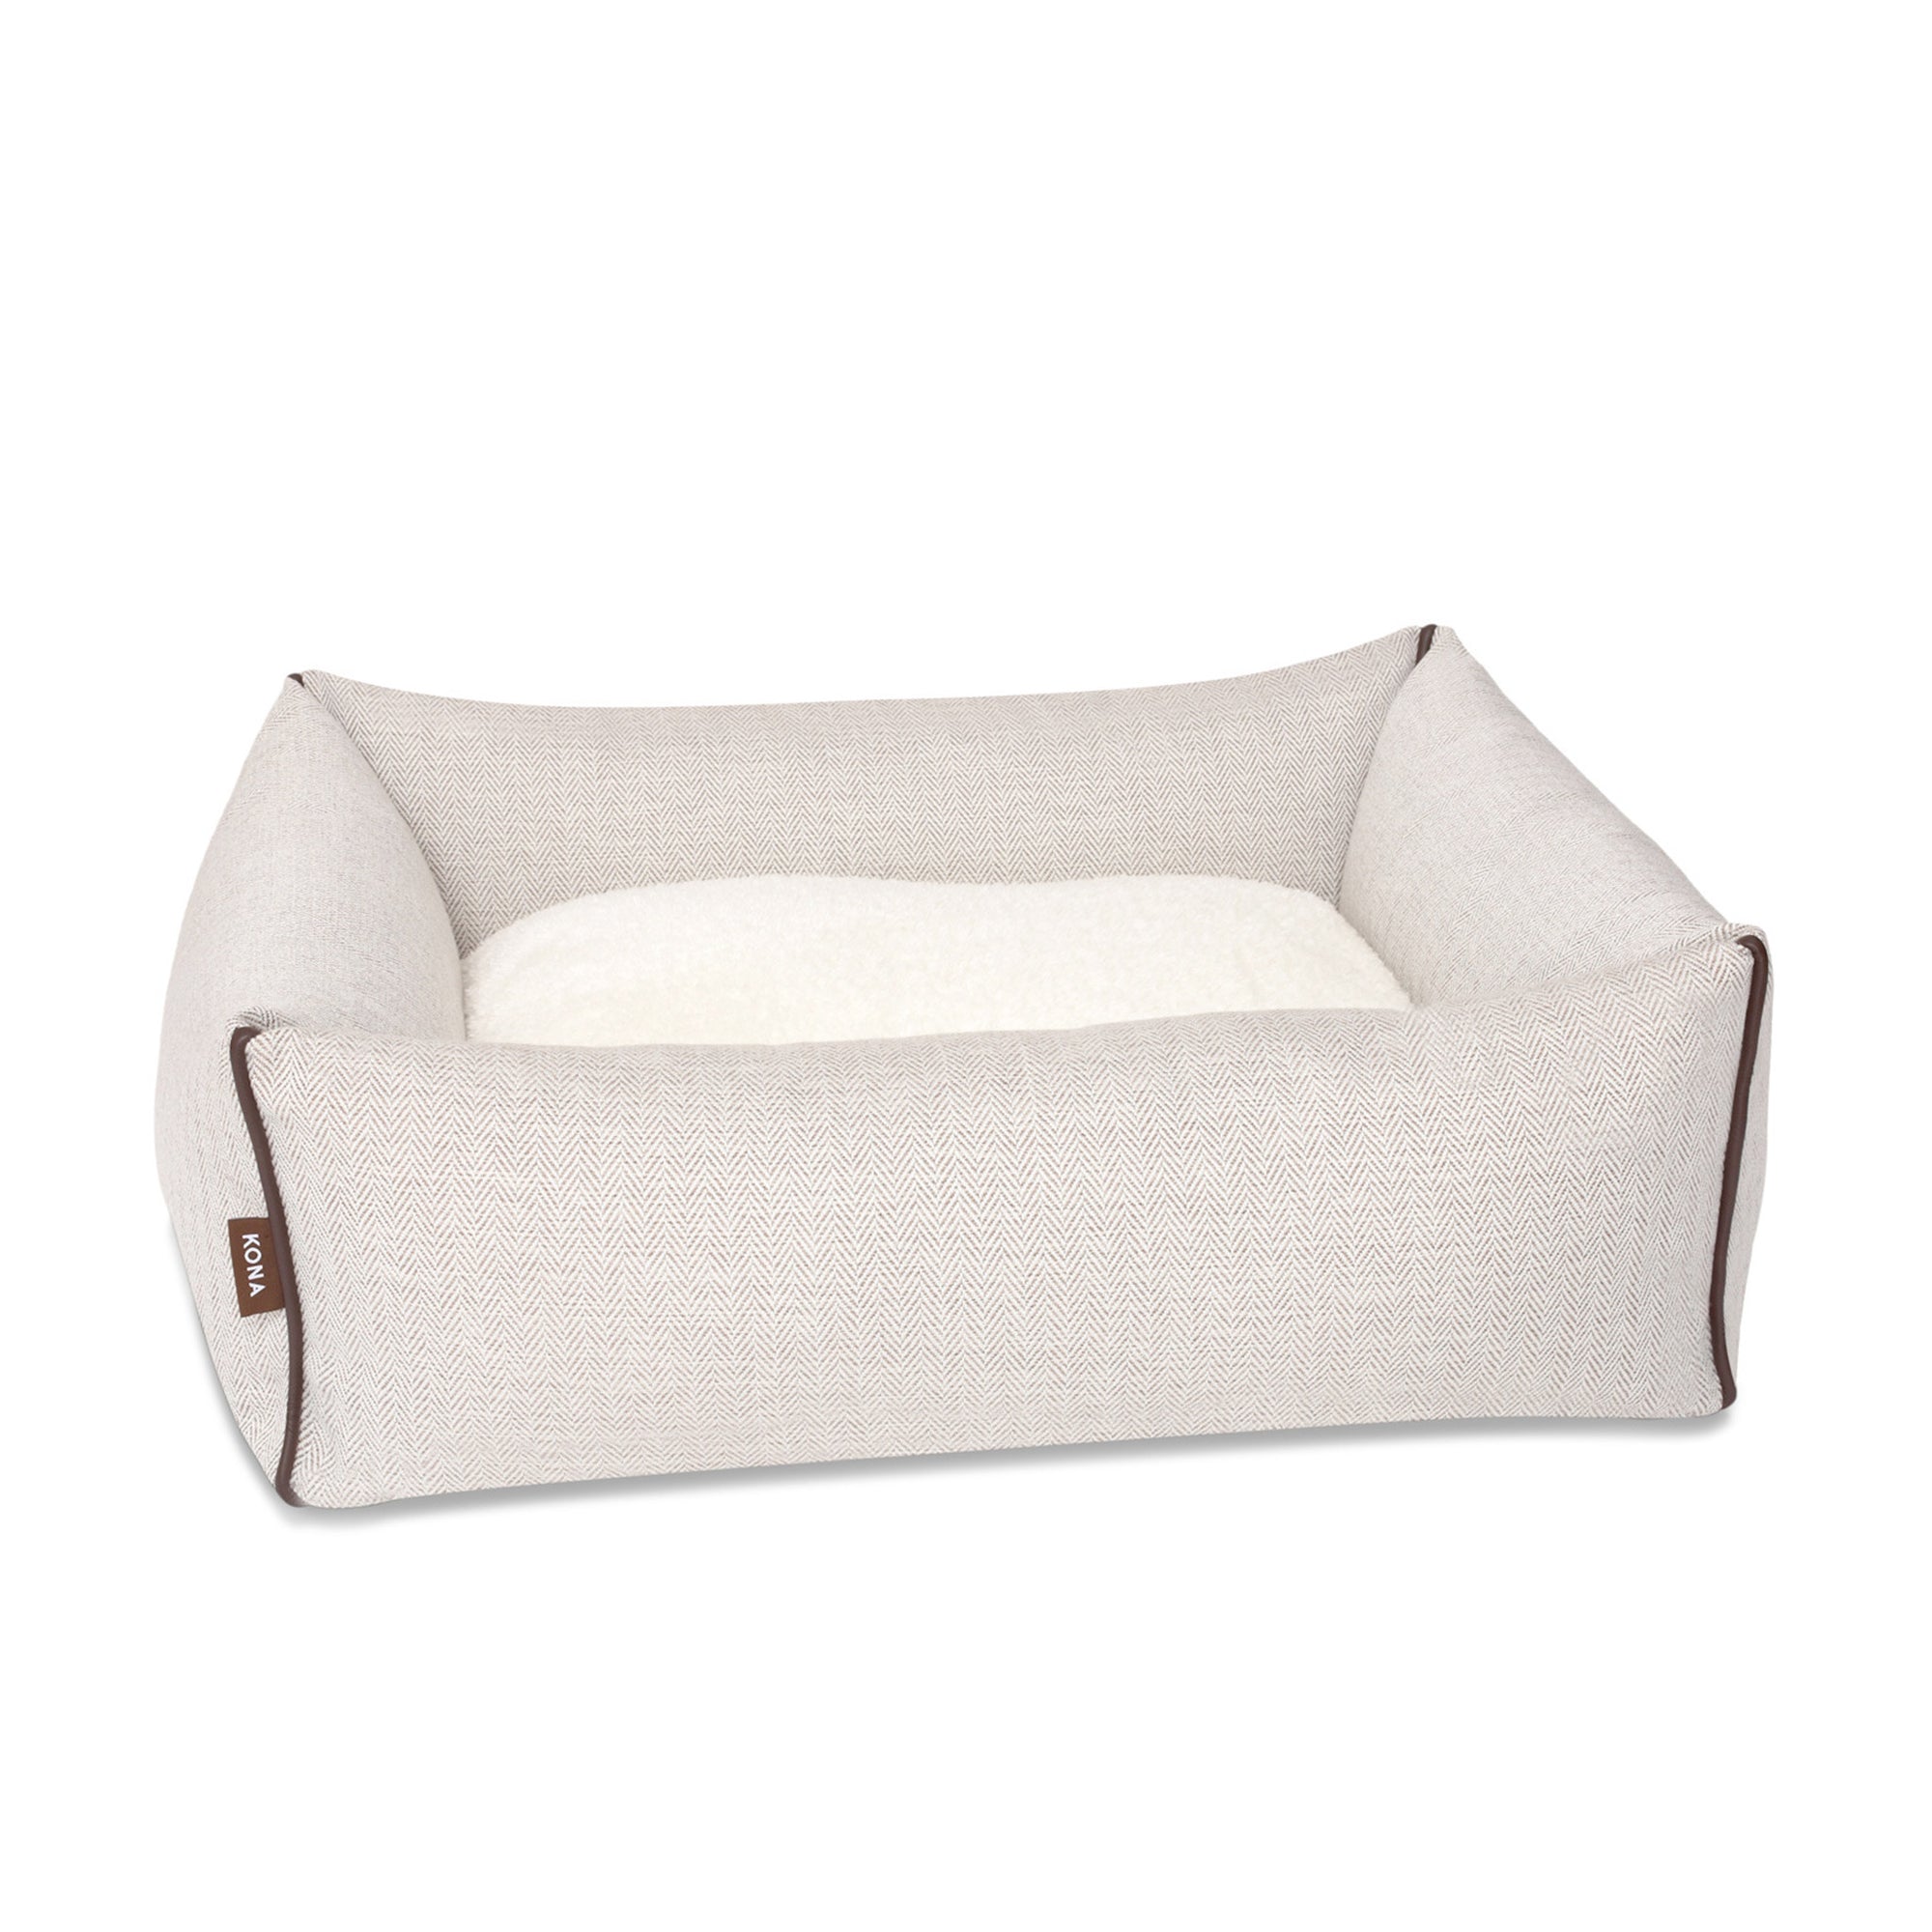 KONA CAVE® designer Snuggle Cave dog bed in cream herringbone fabric with removable cave cover.  